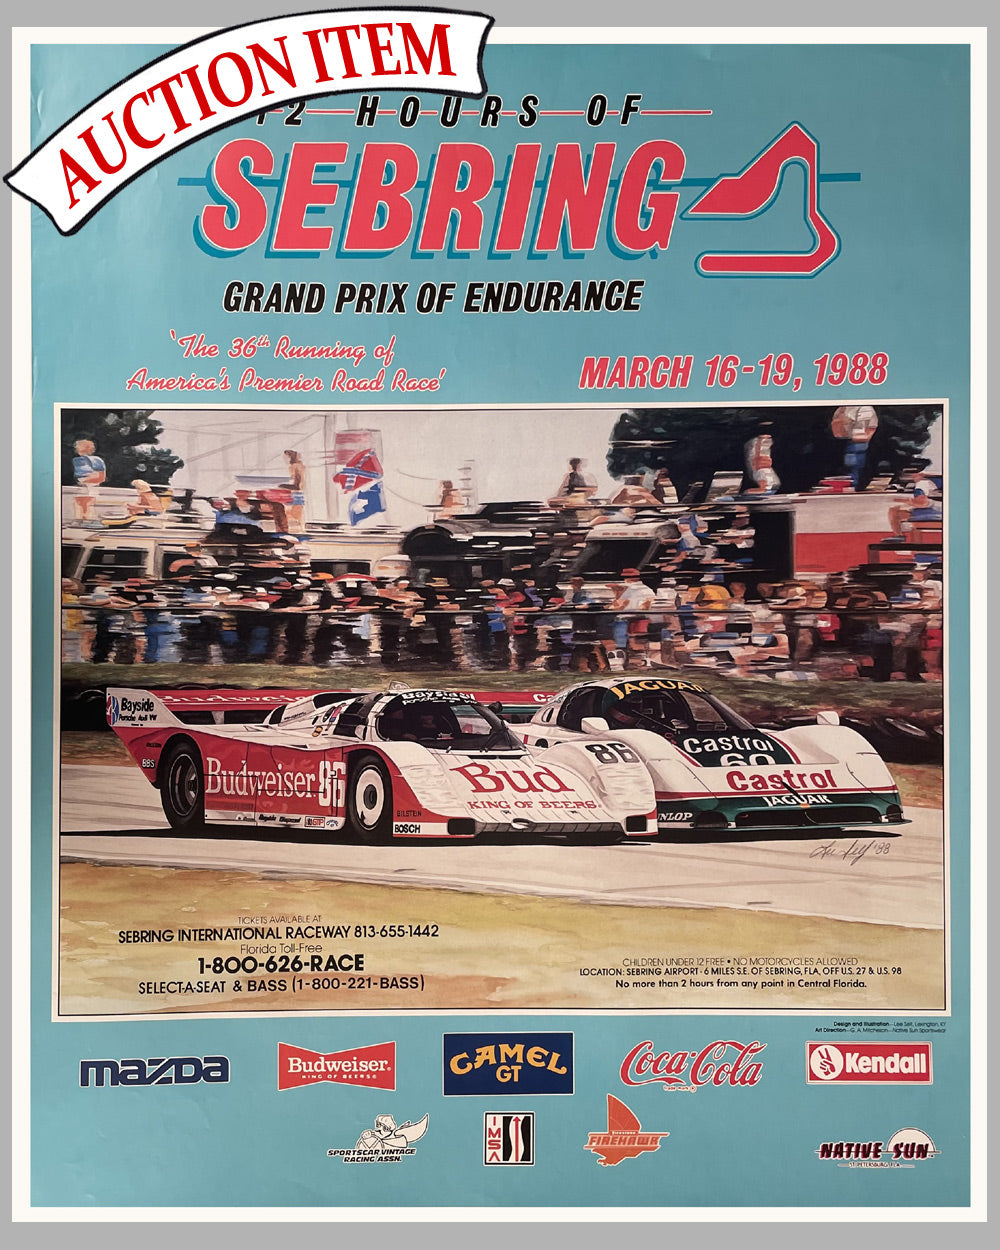 5 - 12 Hours of Sebring 1988 official race poster by Lee Self